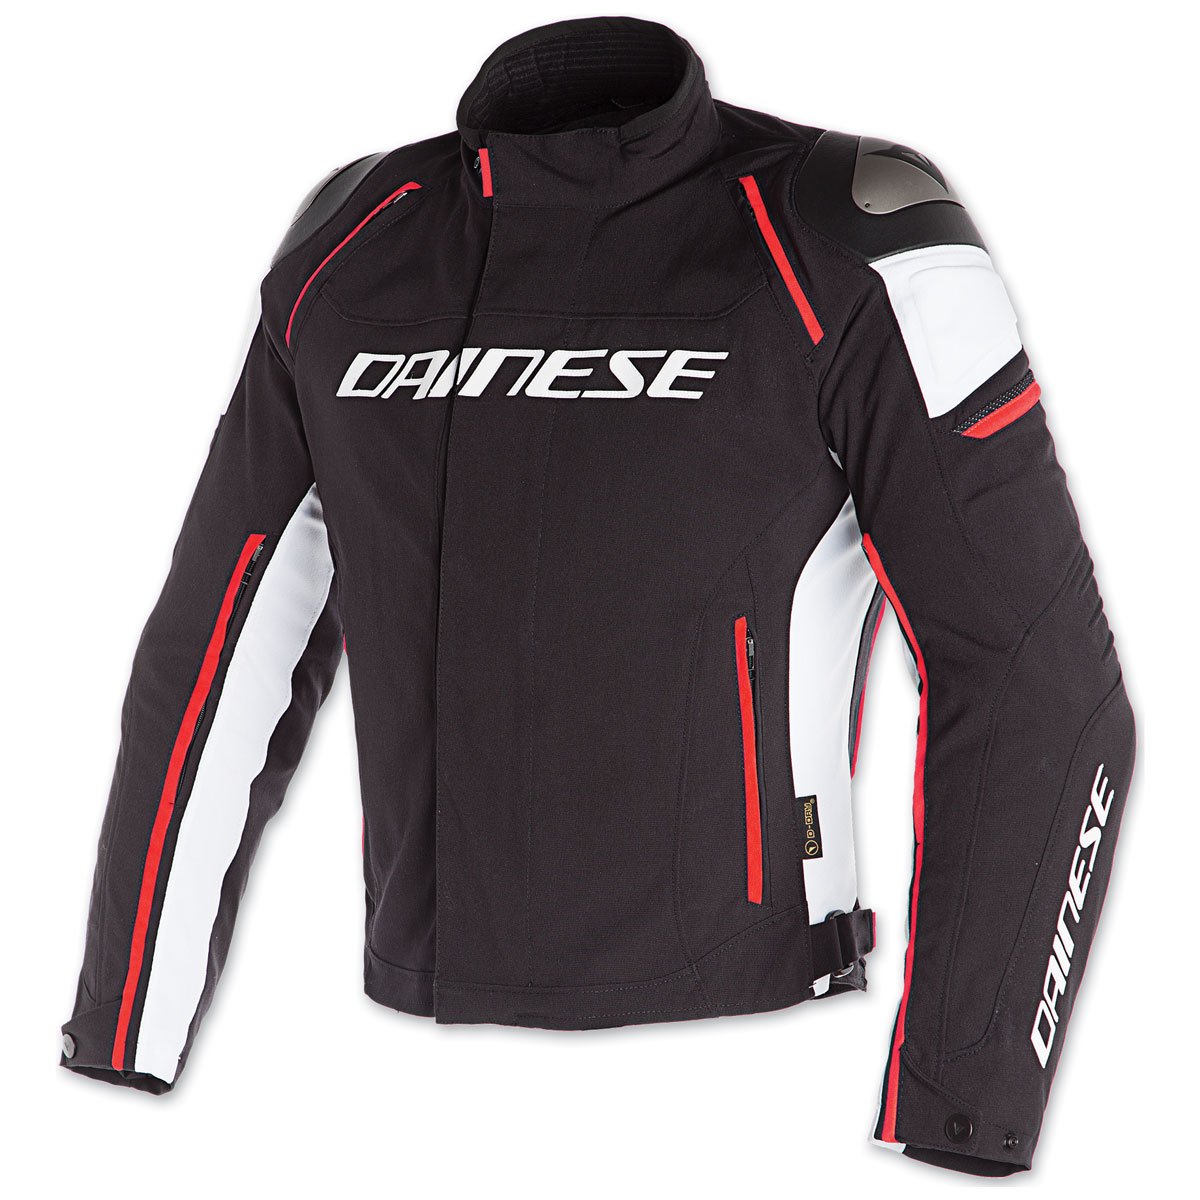 Image of Dainese Racing 3 D-Dry Jacket Black White Fluo Red Size 48 EN